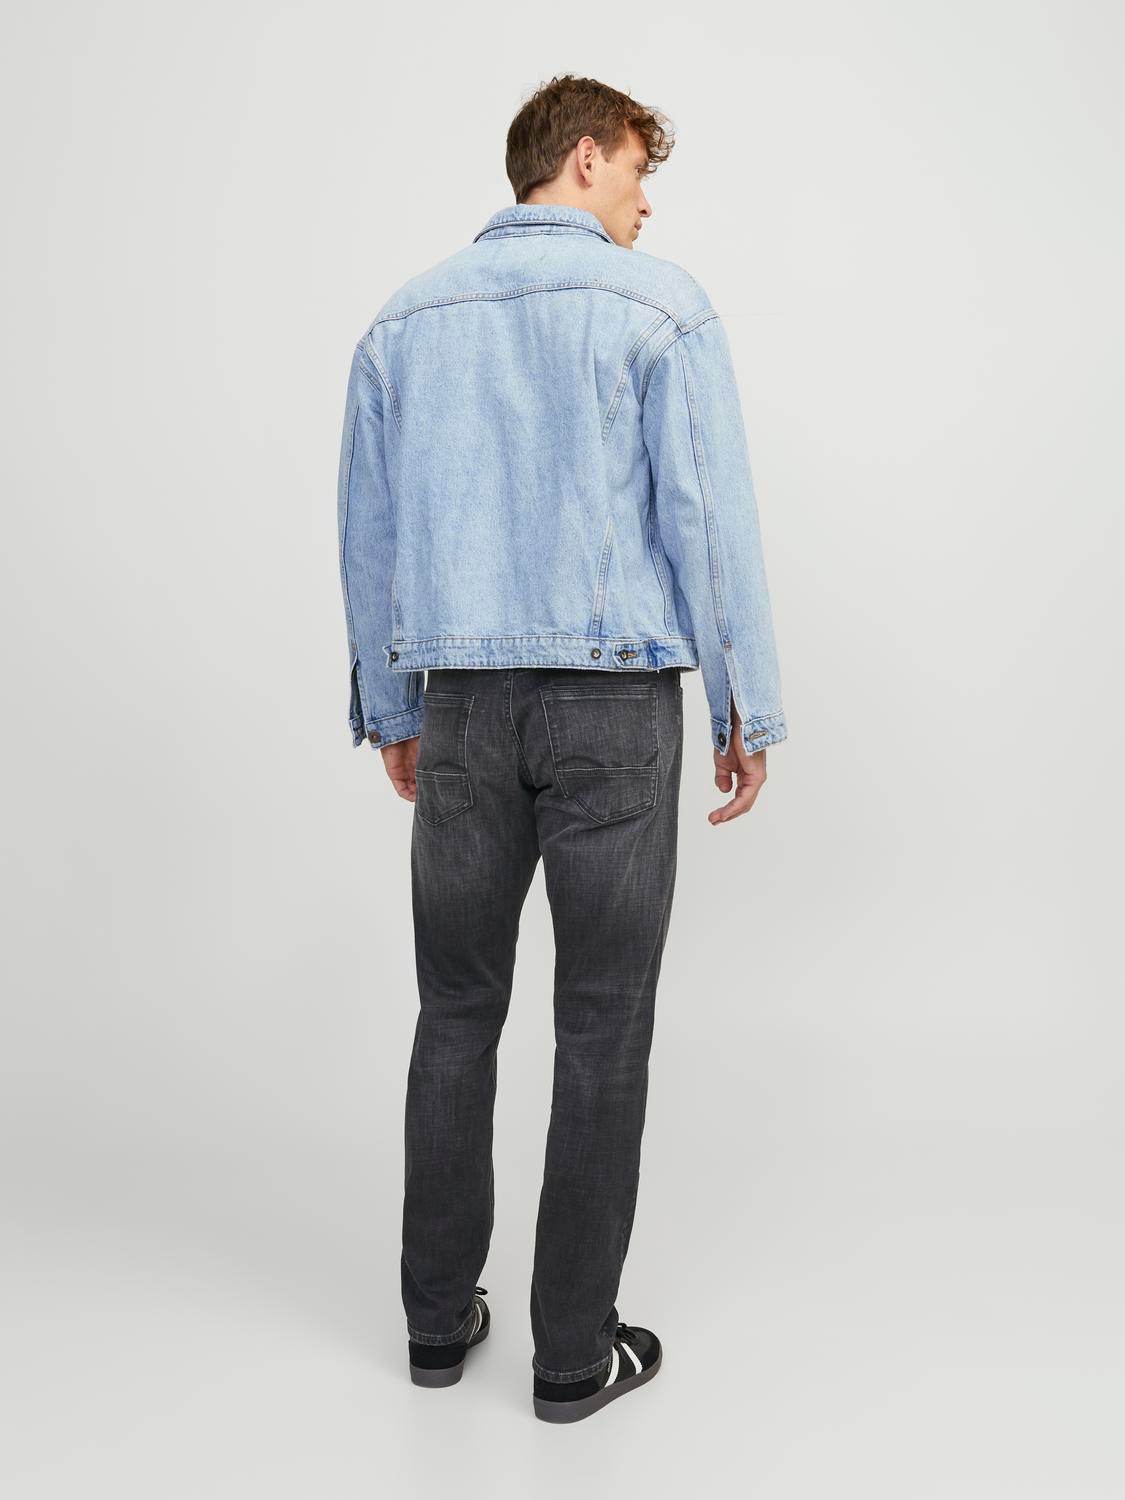 JJICHRIS JJWOOD GE 815 Relaxed Fit Jeans with 10% discount! | Jack & Jones®